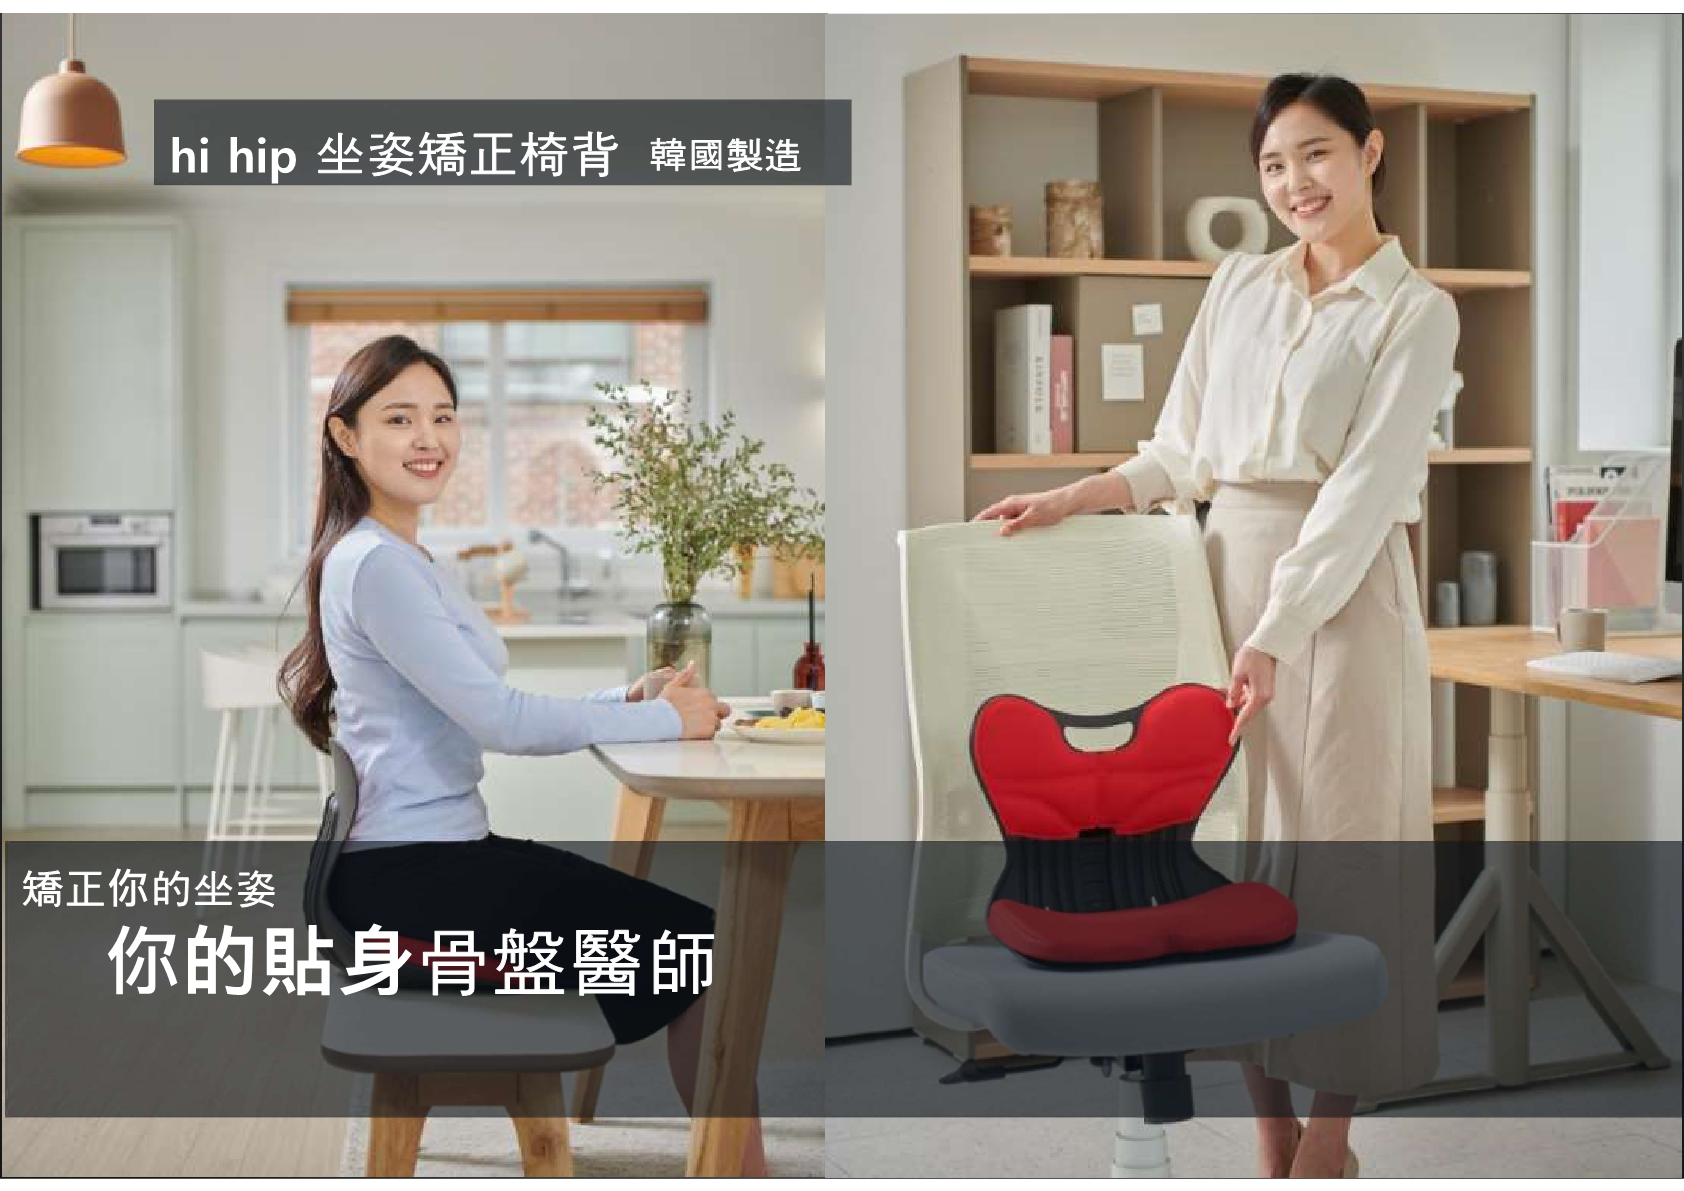 hi-hip-custion-chair-product-introduction1.png